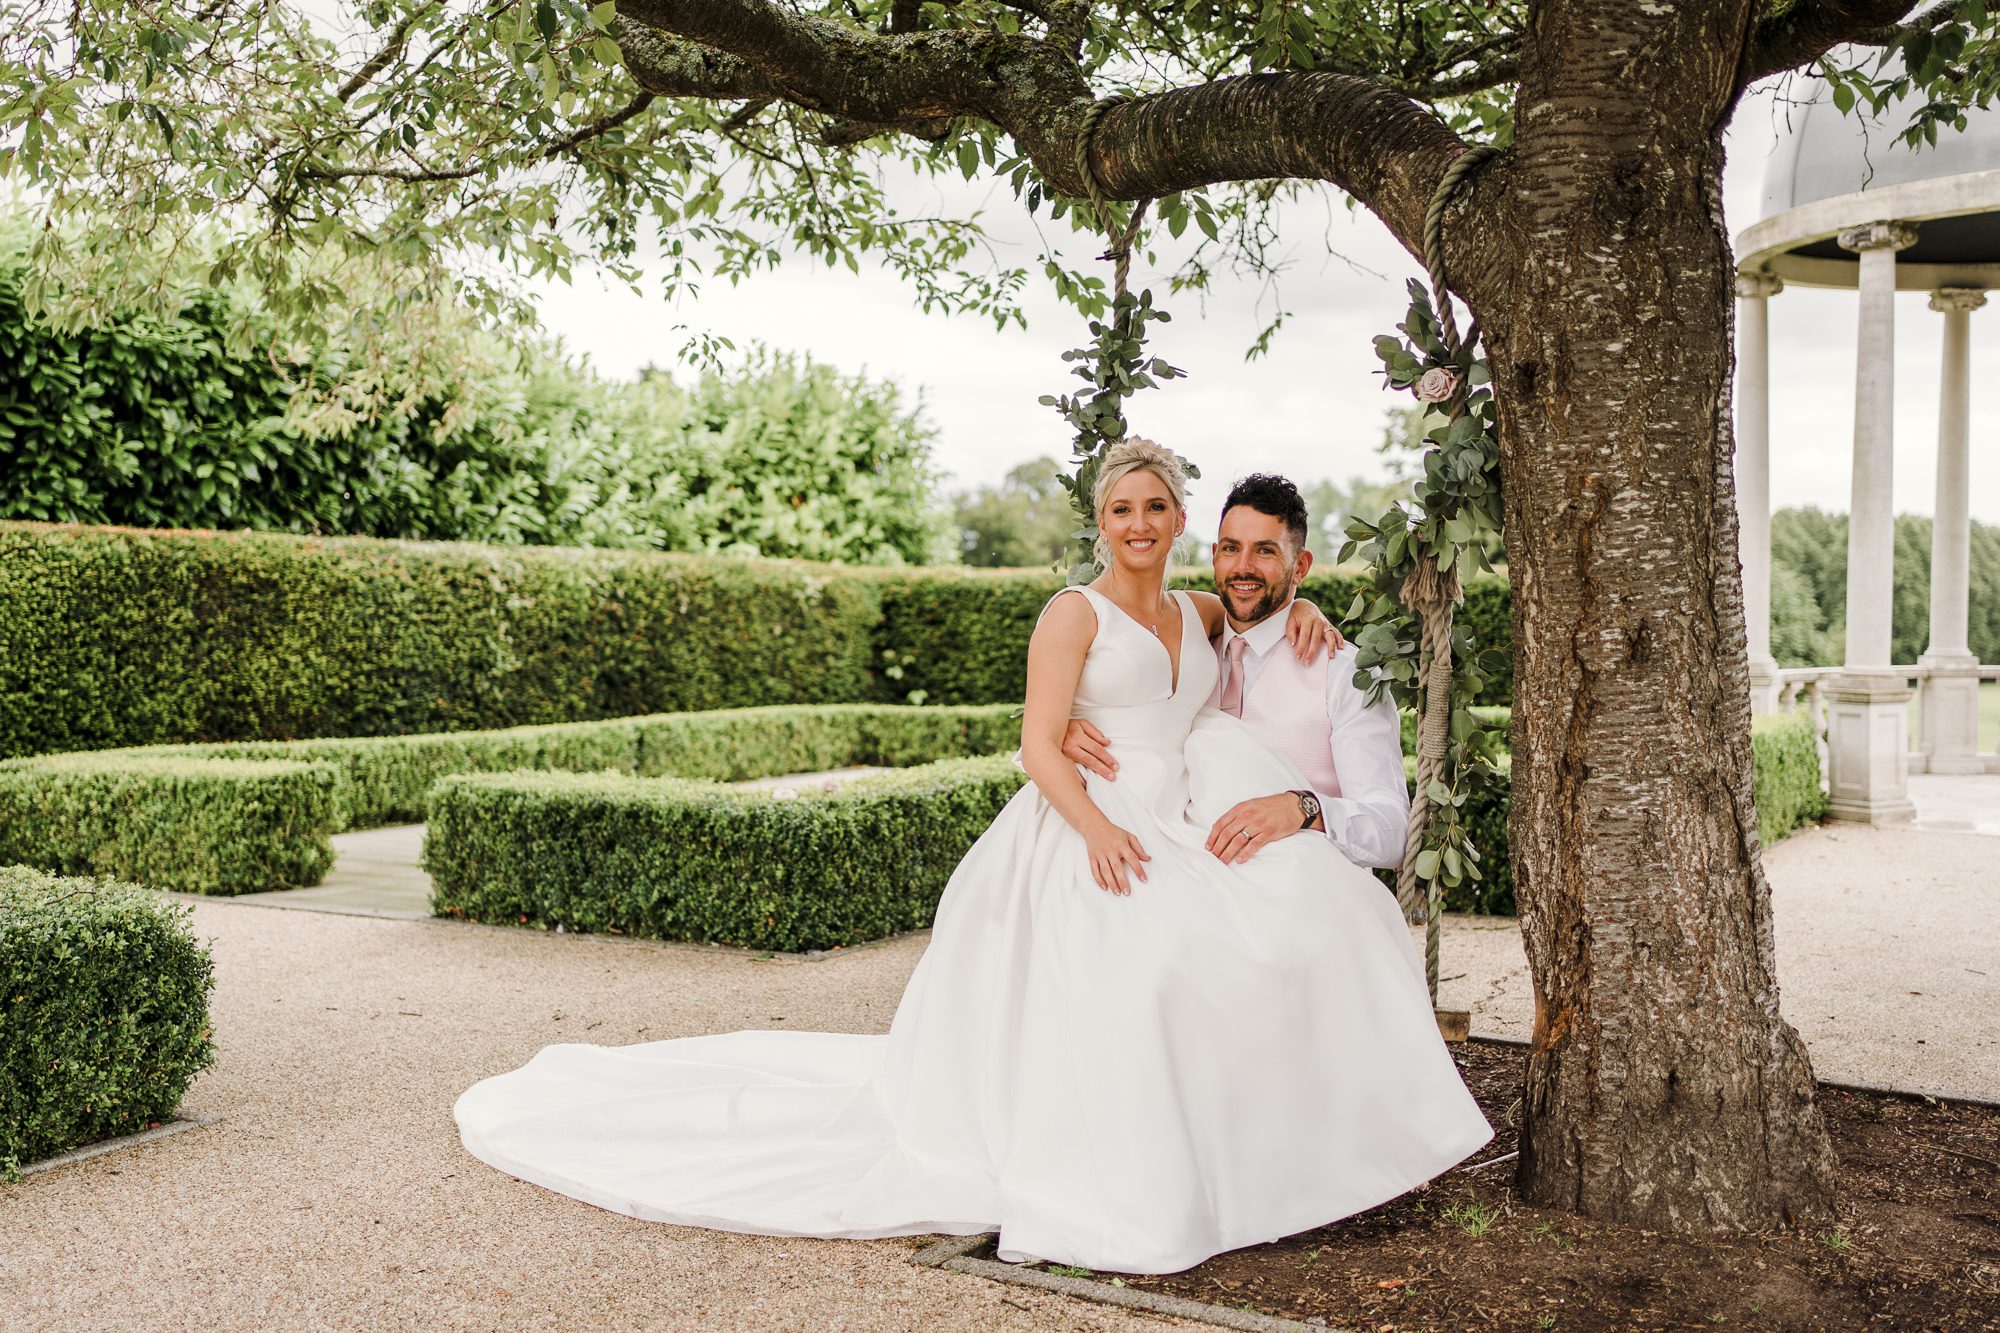 Wedding photography at Froyle Park Country Estate